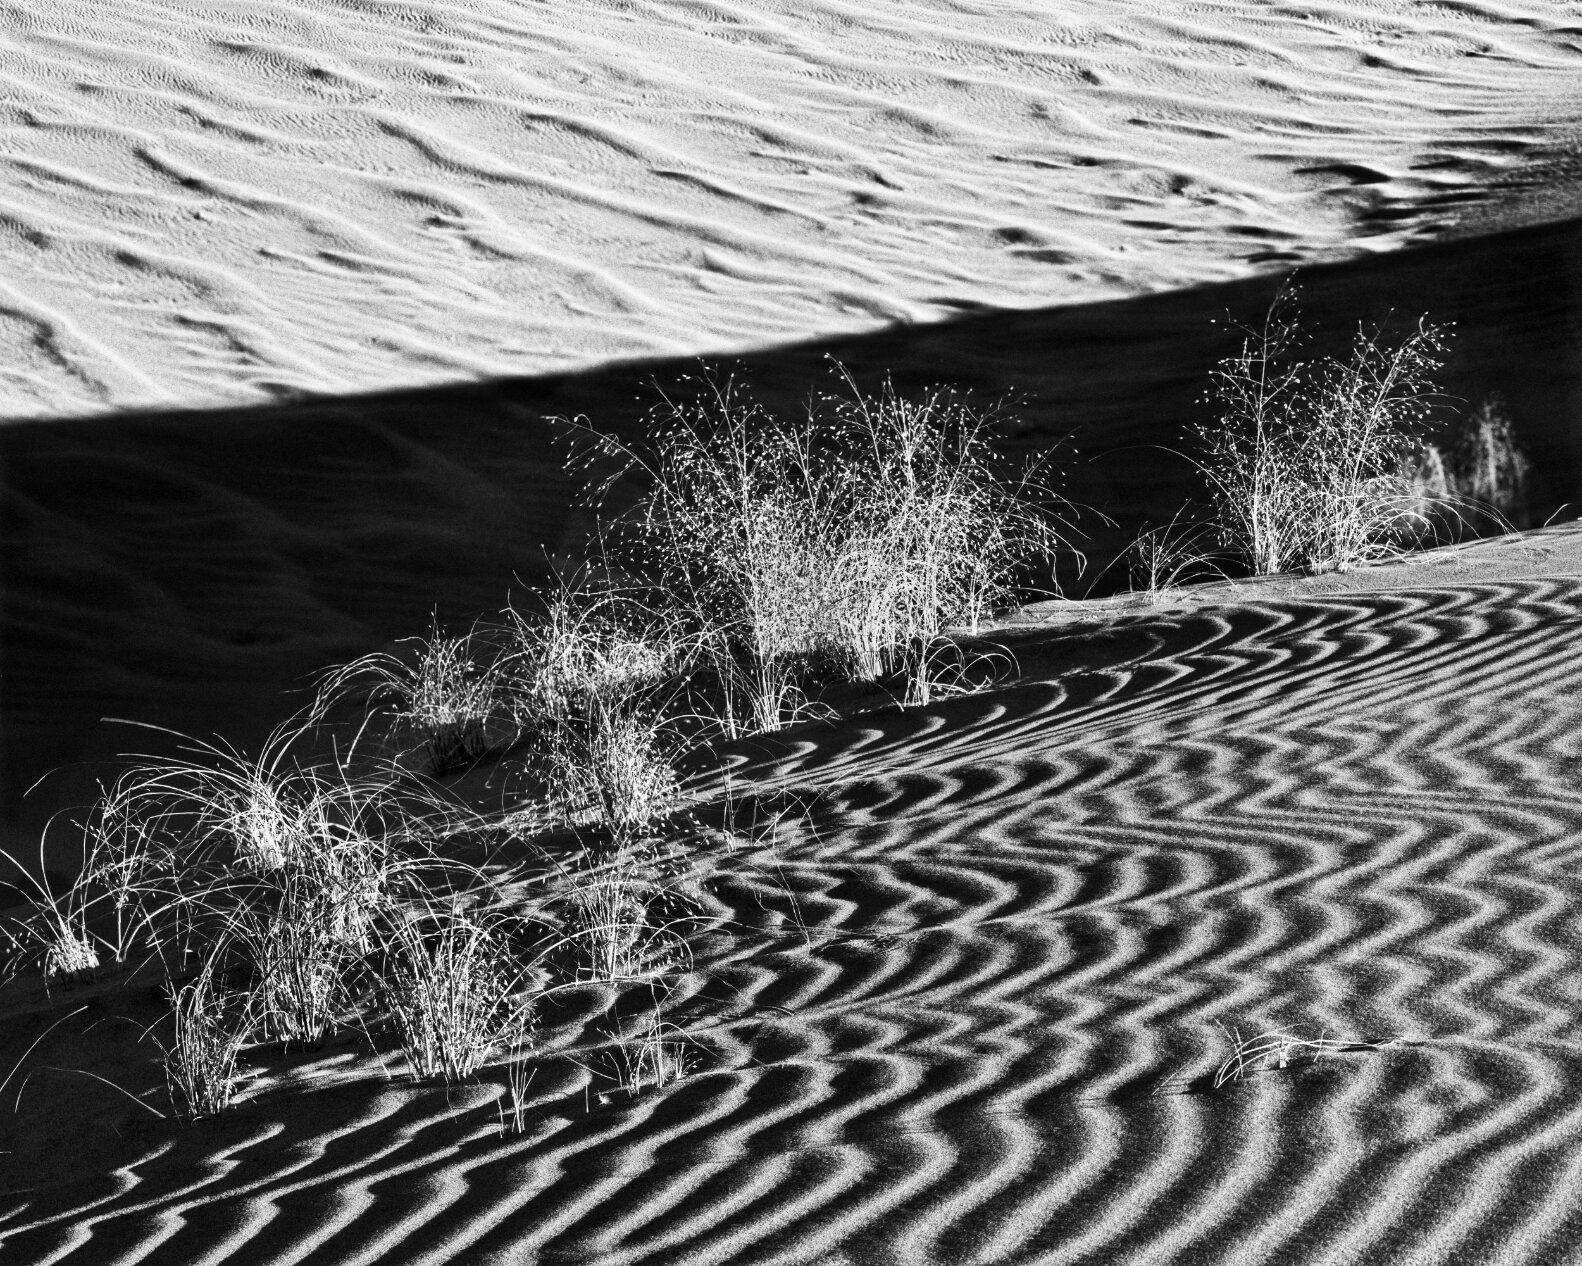 Sand Dunes and Plants - 325